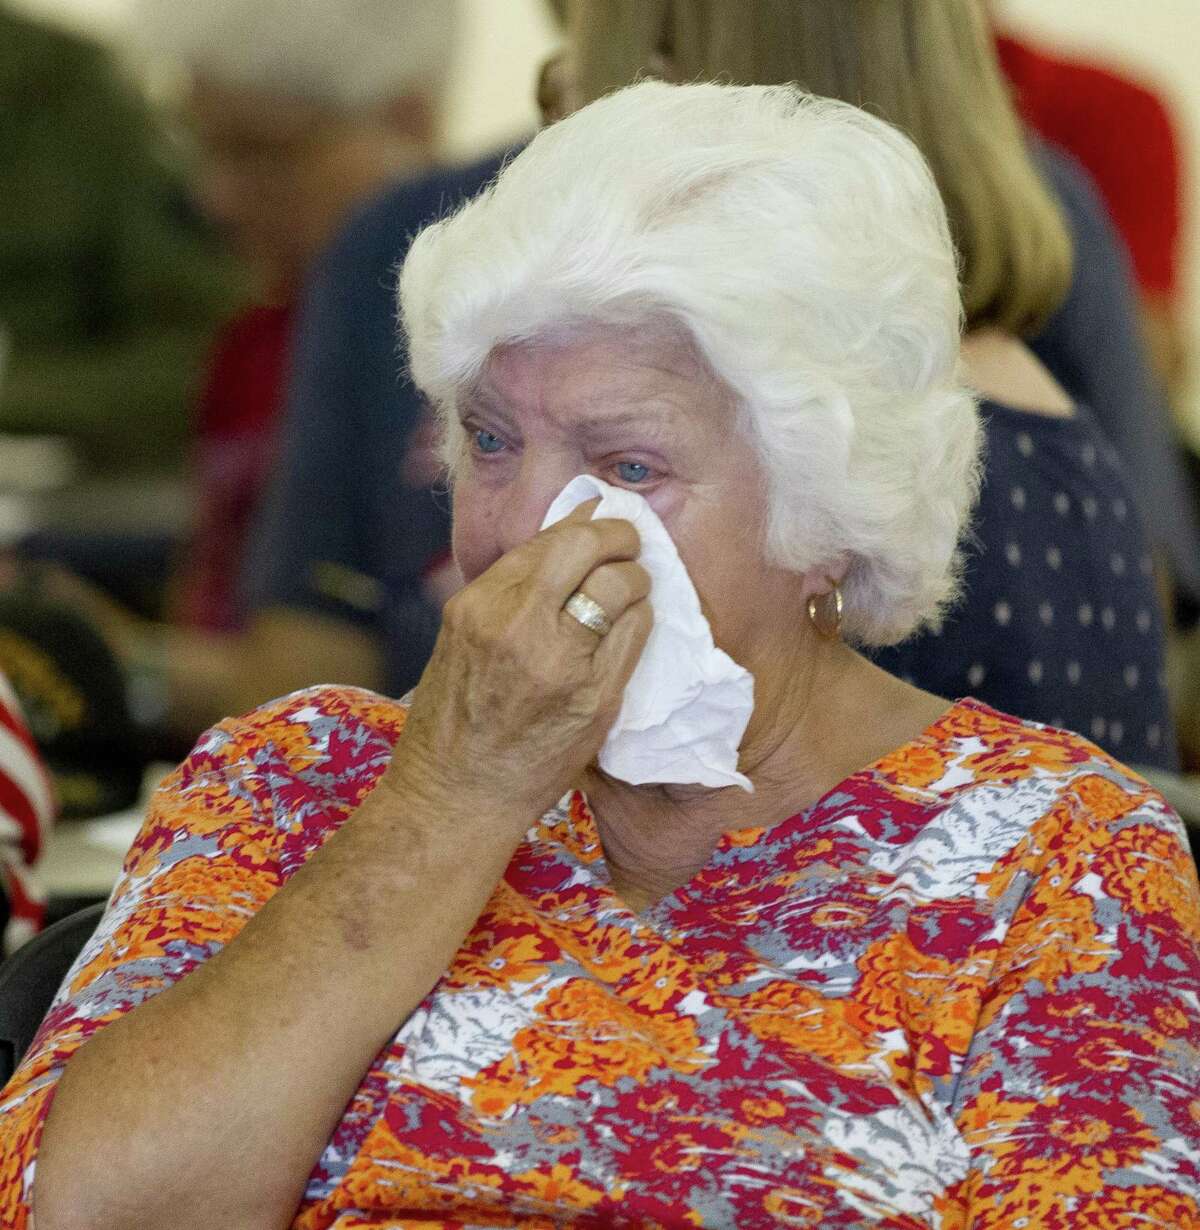 Barbara Hitchens wipes away tears during a Memorial Day ceremony hosted by American Legion Post 411, Monday, May 27, 2019, in Conroe. Hitchens’ grandson, Jason Karella, was killed in action while serving as a Marine in Afghanistan in 2008.